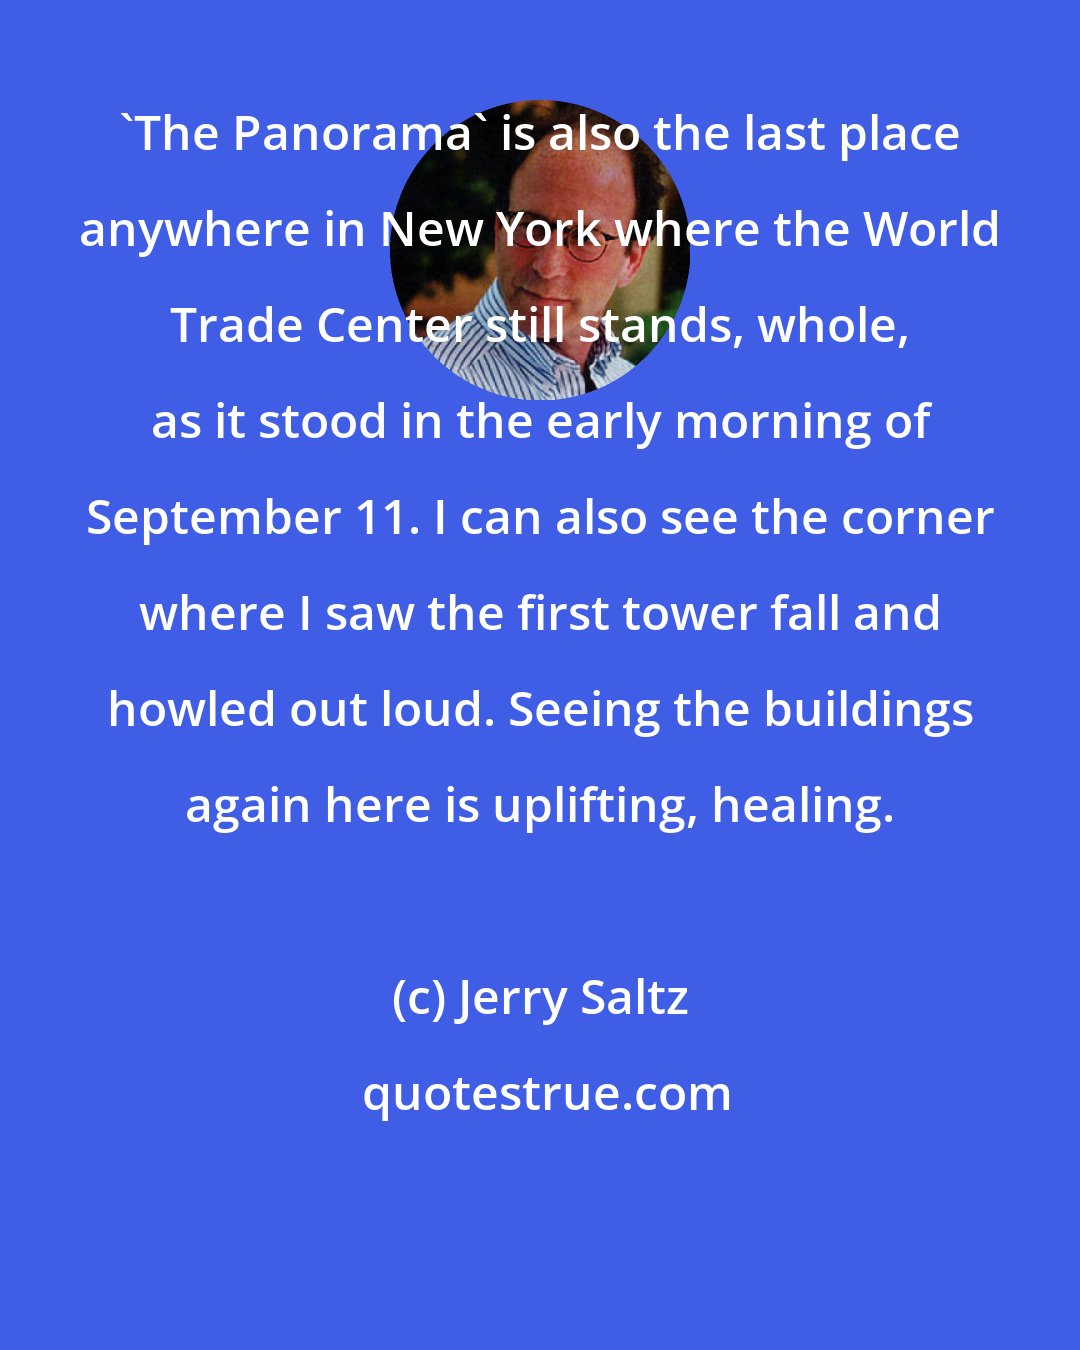 Jerry Saltz: 'The Panorama' is also the last place anywhere in New York where the World Trade Center still stands, whole, as it stood in the early morning of September 11. I can also see the corner where I saw the first tower fall and howled out loud. Seeing the buildings again here is uplifting, healing.